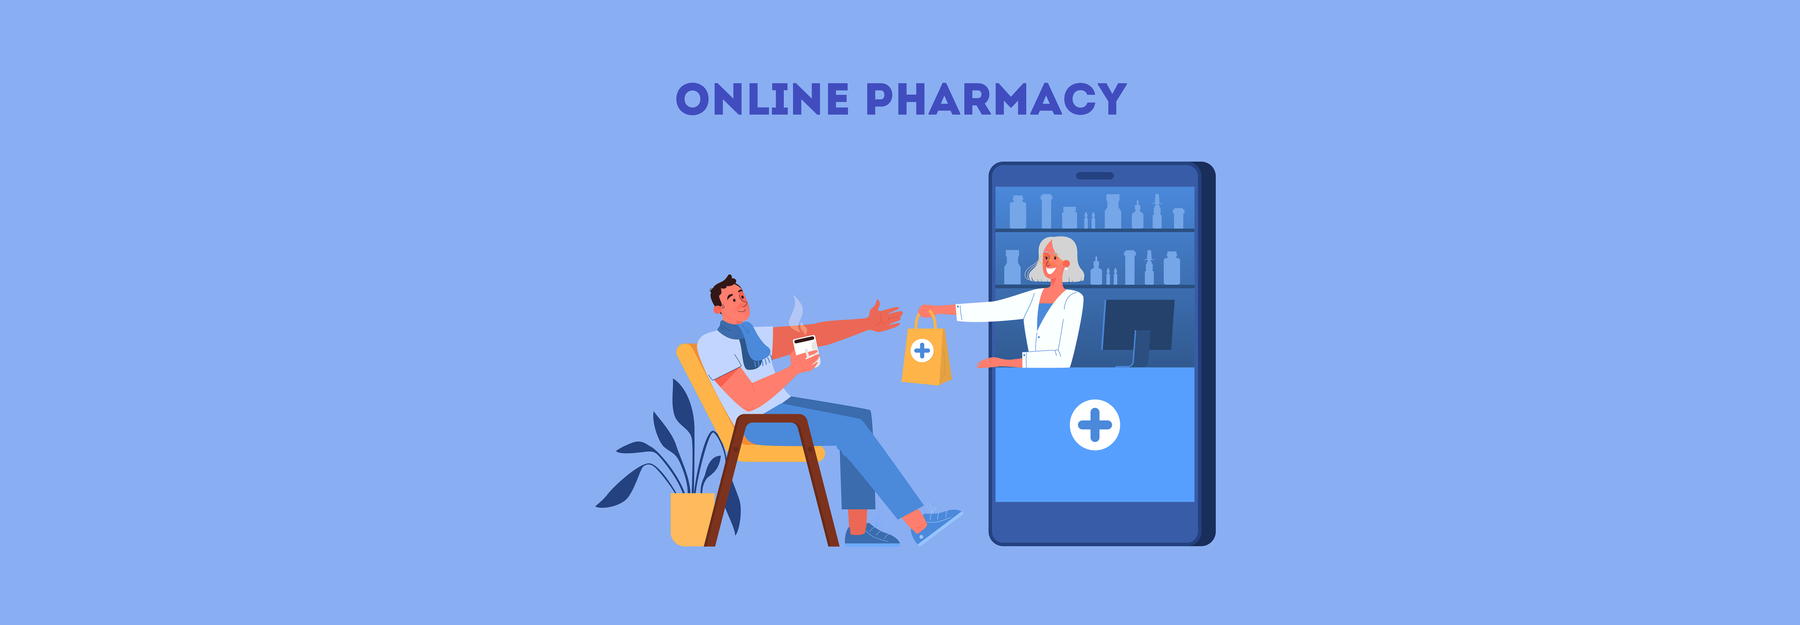 Online Pharmacy 101: What you need to know about virtual pharmacies - The Health Depot